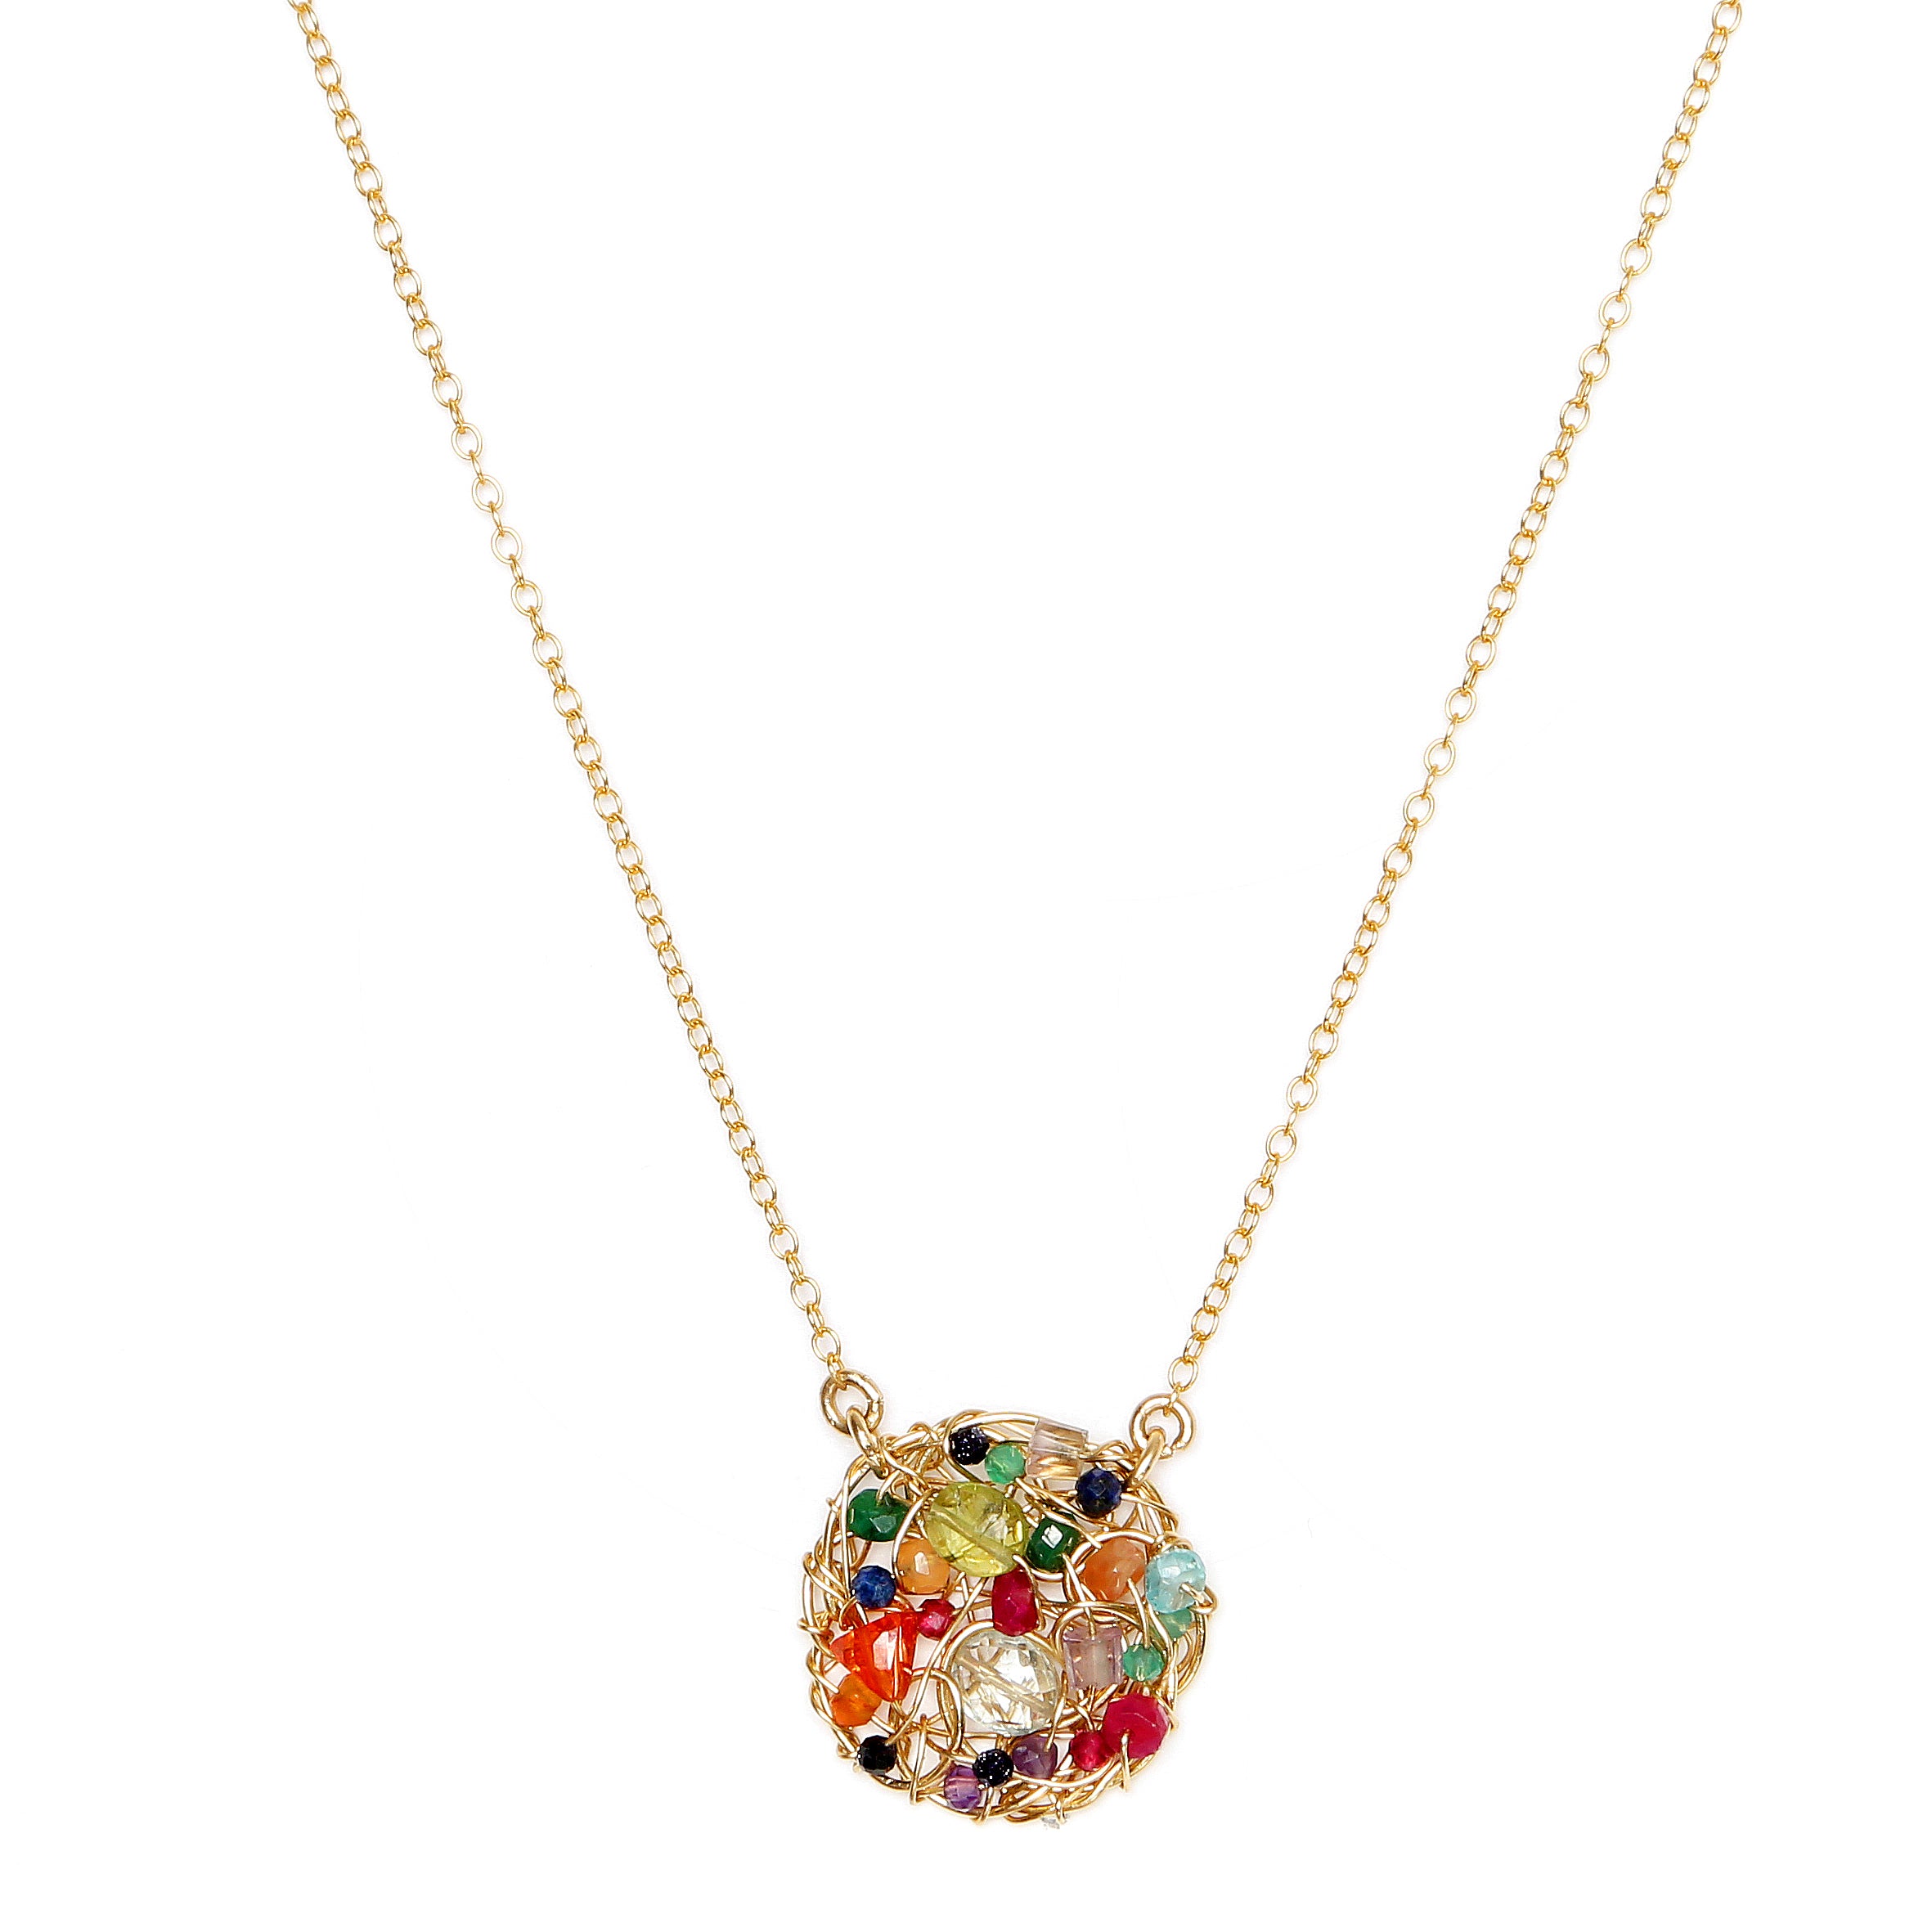 Aura Necklace #2 (15mm) - Multicolor Mix Gems Necklaces TARBAY   